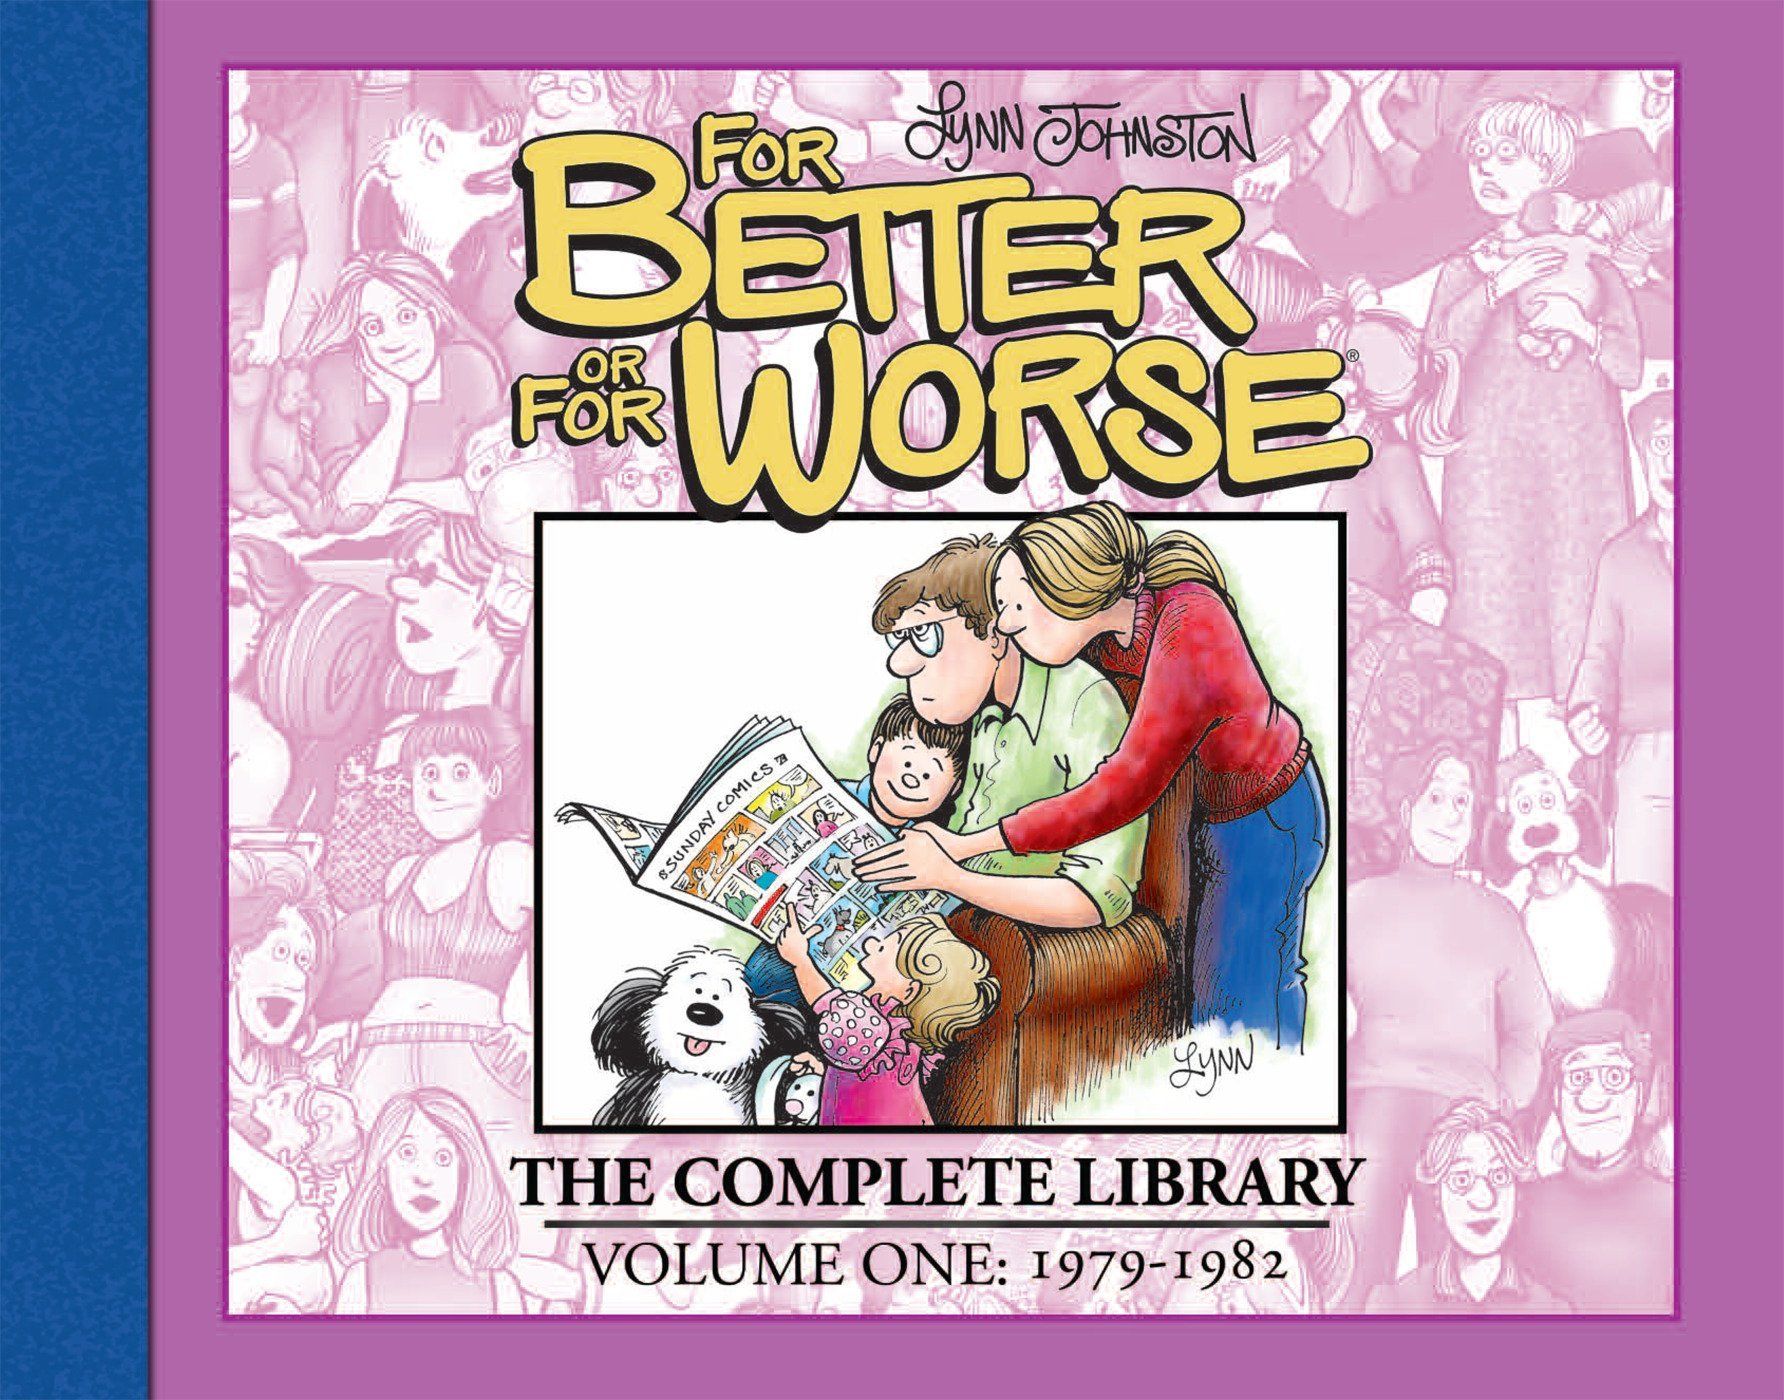 the cover of For Better or For Worse Vol 1